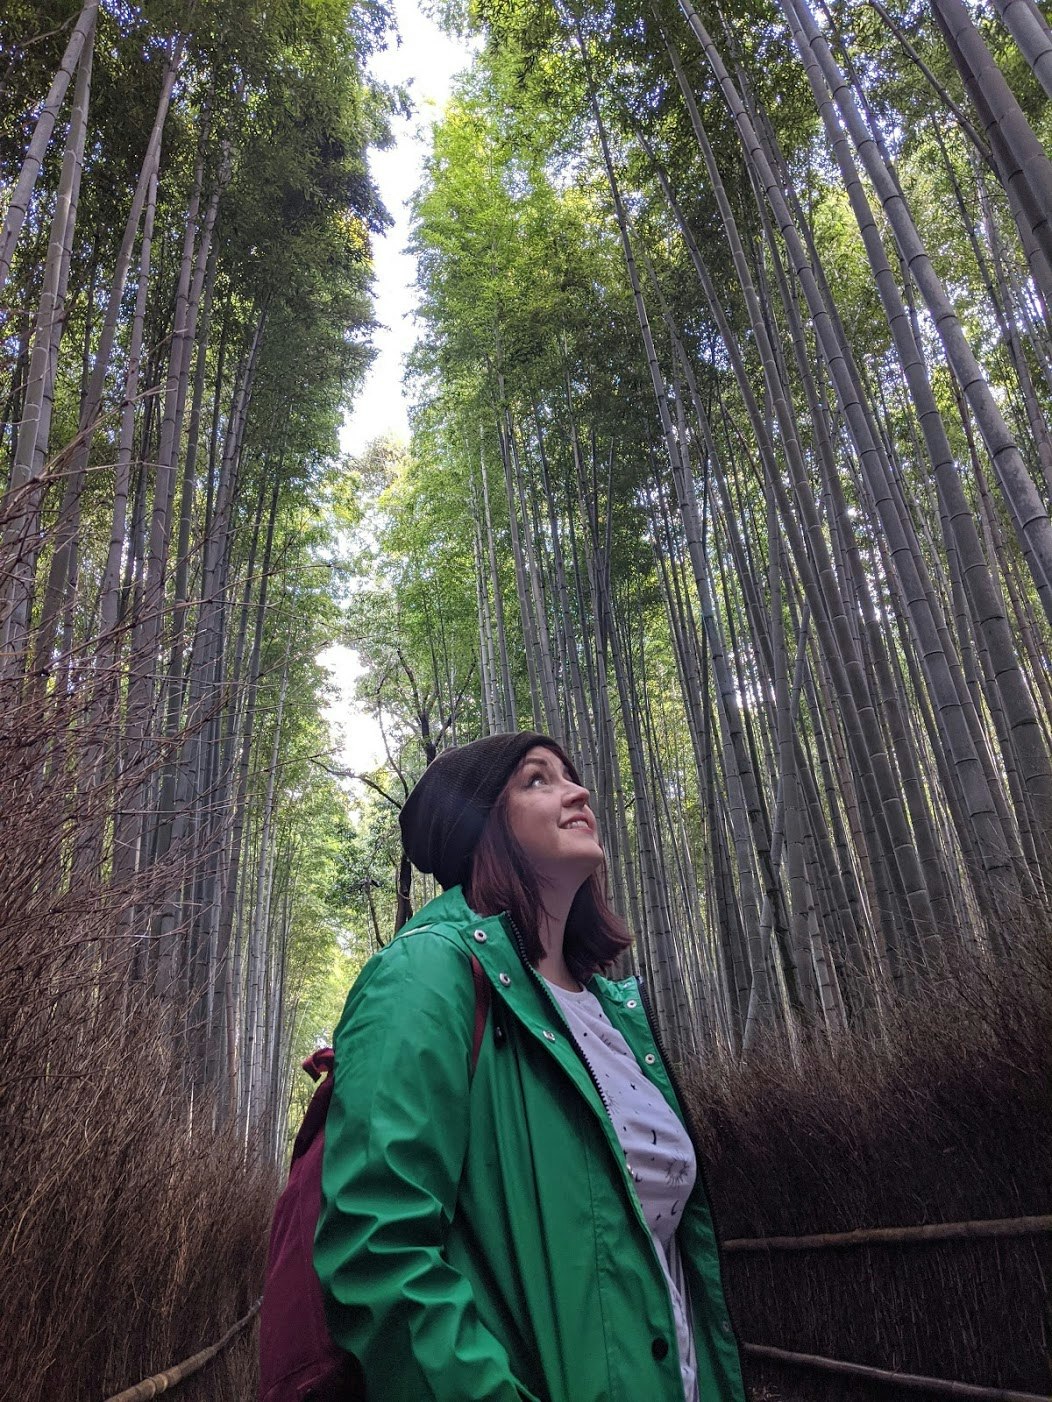 Young woman in the bamboo forest, Japan